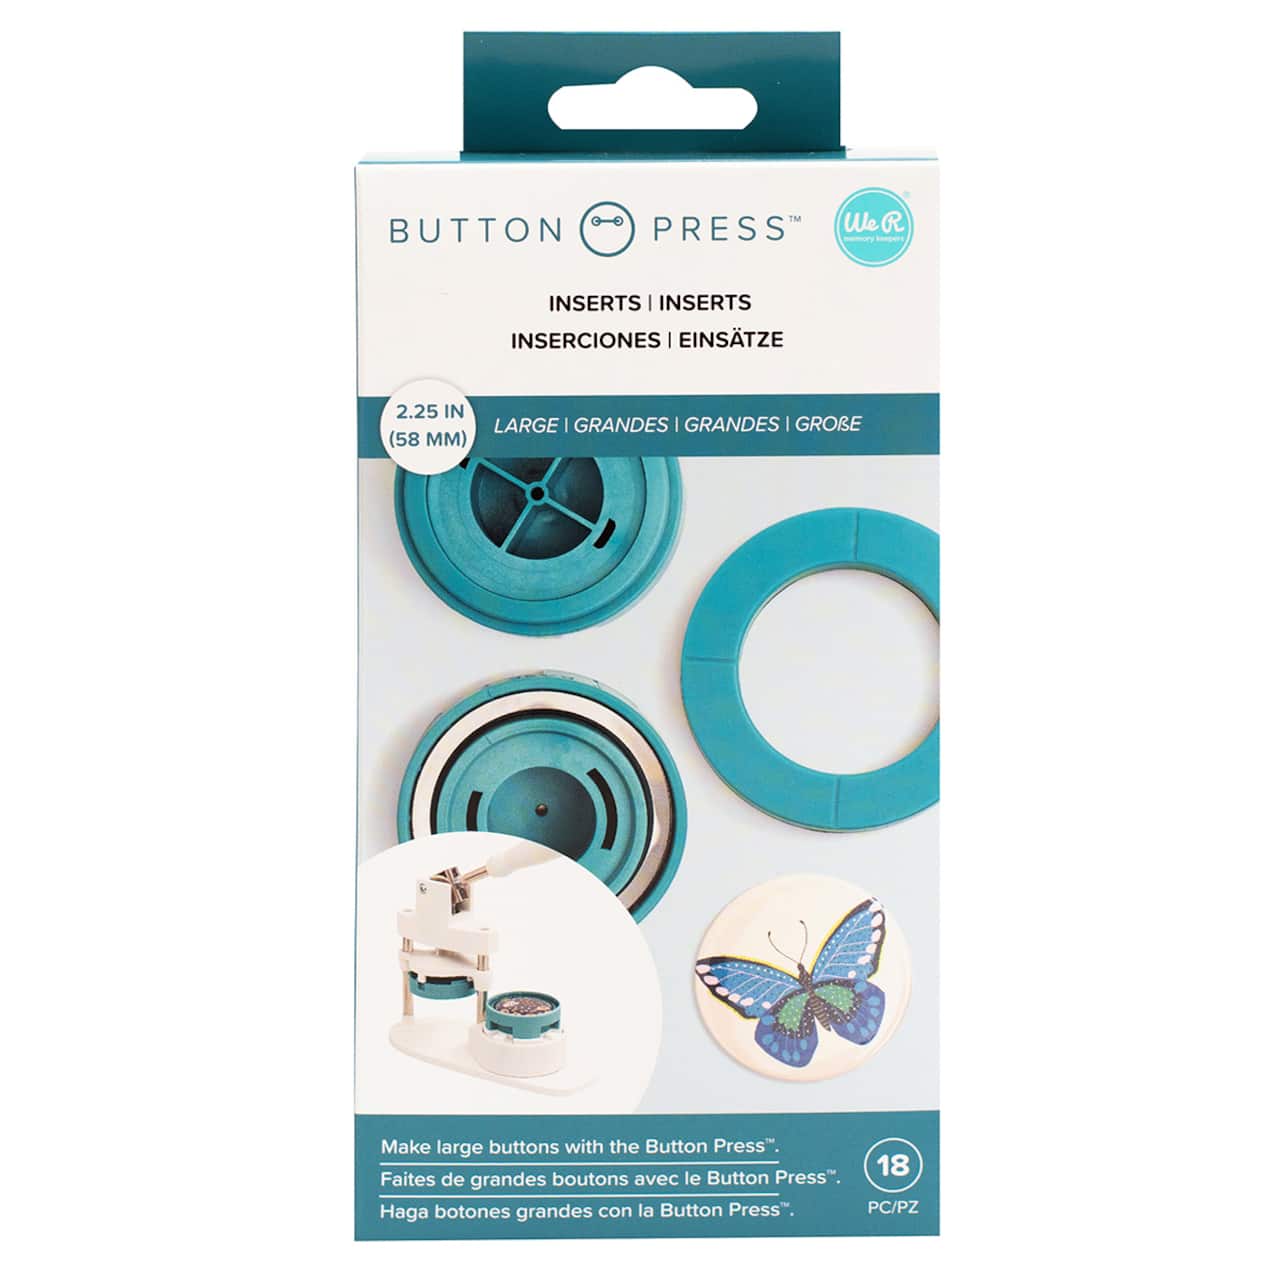 We R Memory Keepers® Button Press™ Large Inserts